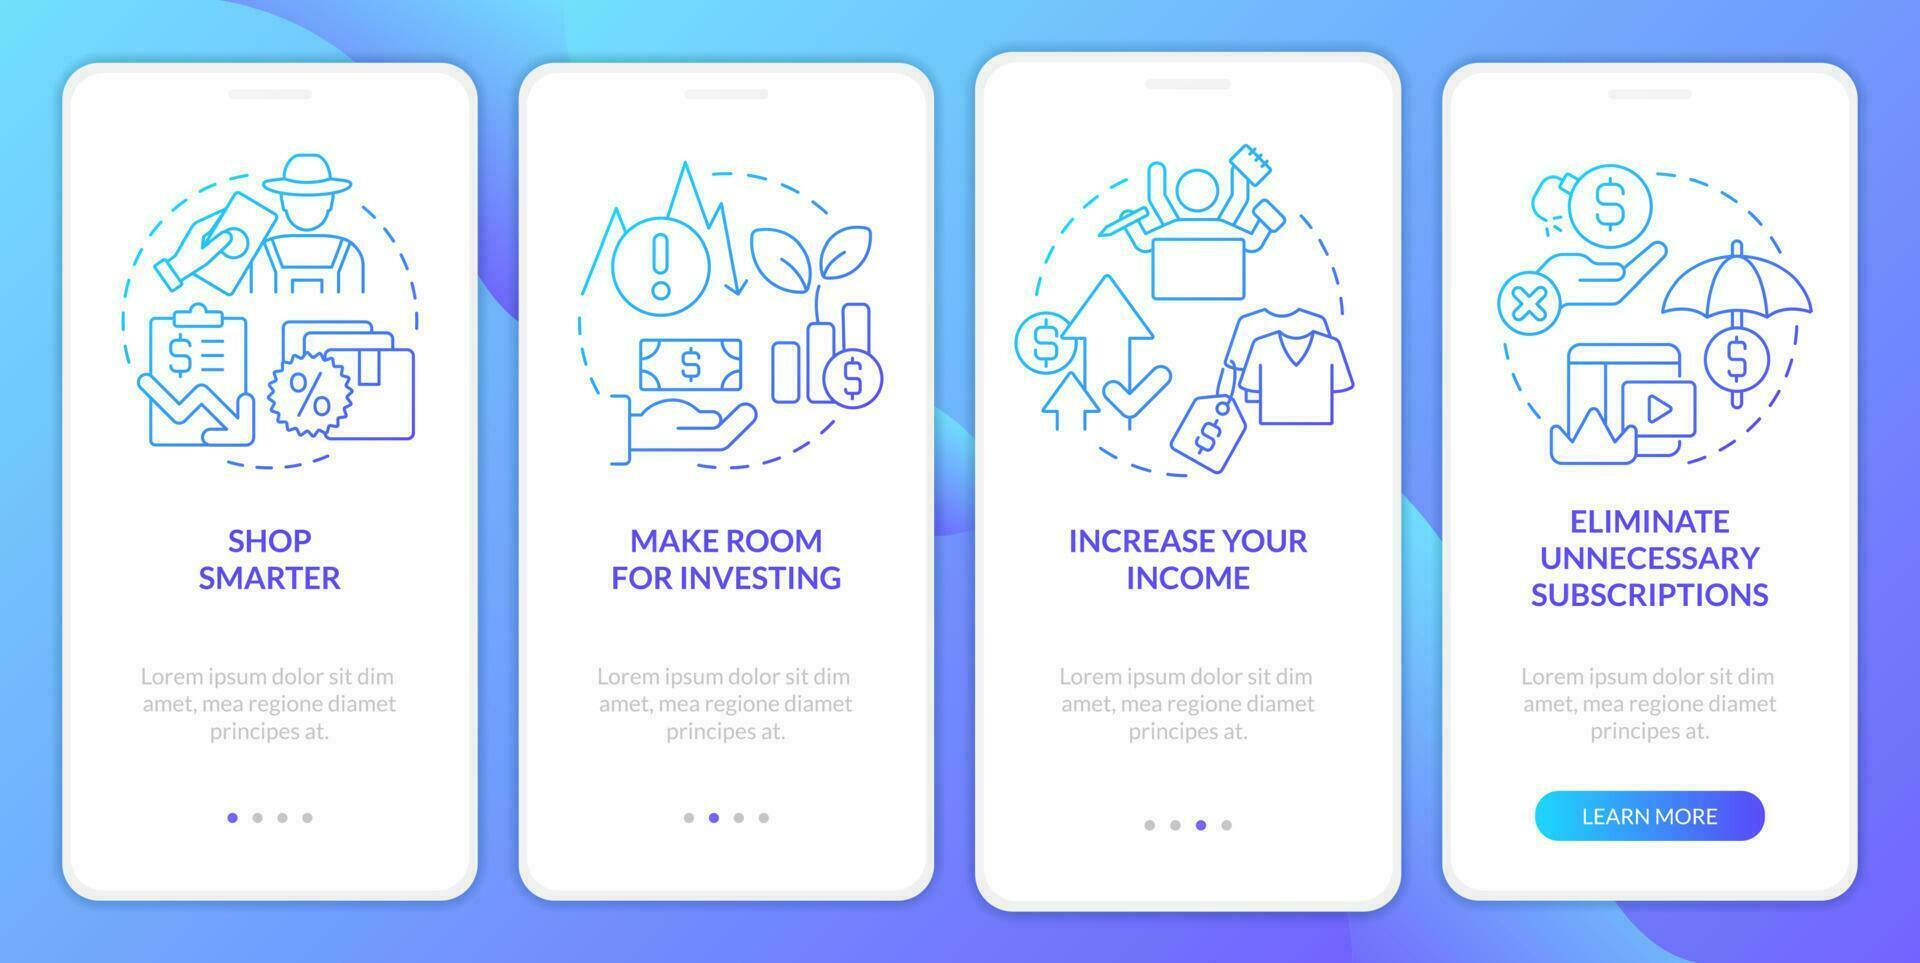 Budget planning for inflation blue gradient onboarding mobile app screen. Walkthrough 4 steps graphic instructions with linear concepts. UI, UX, GUI template vector